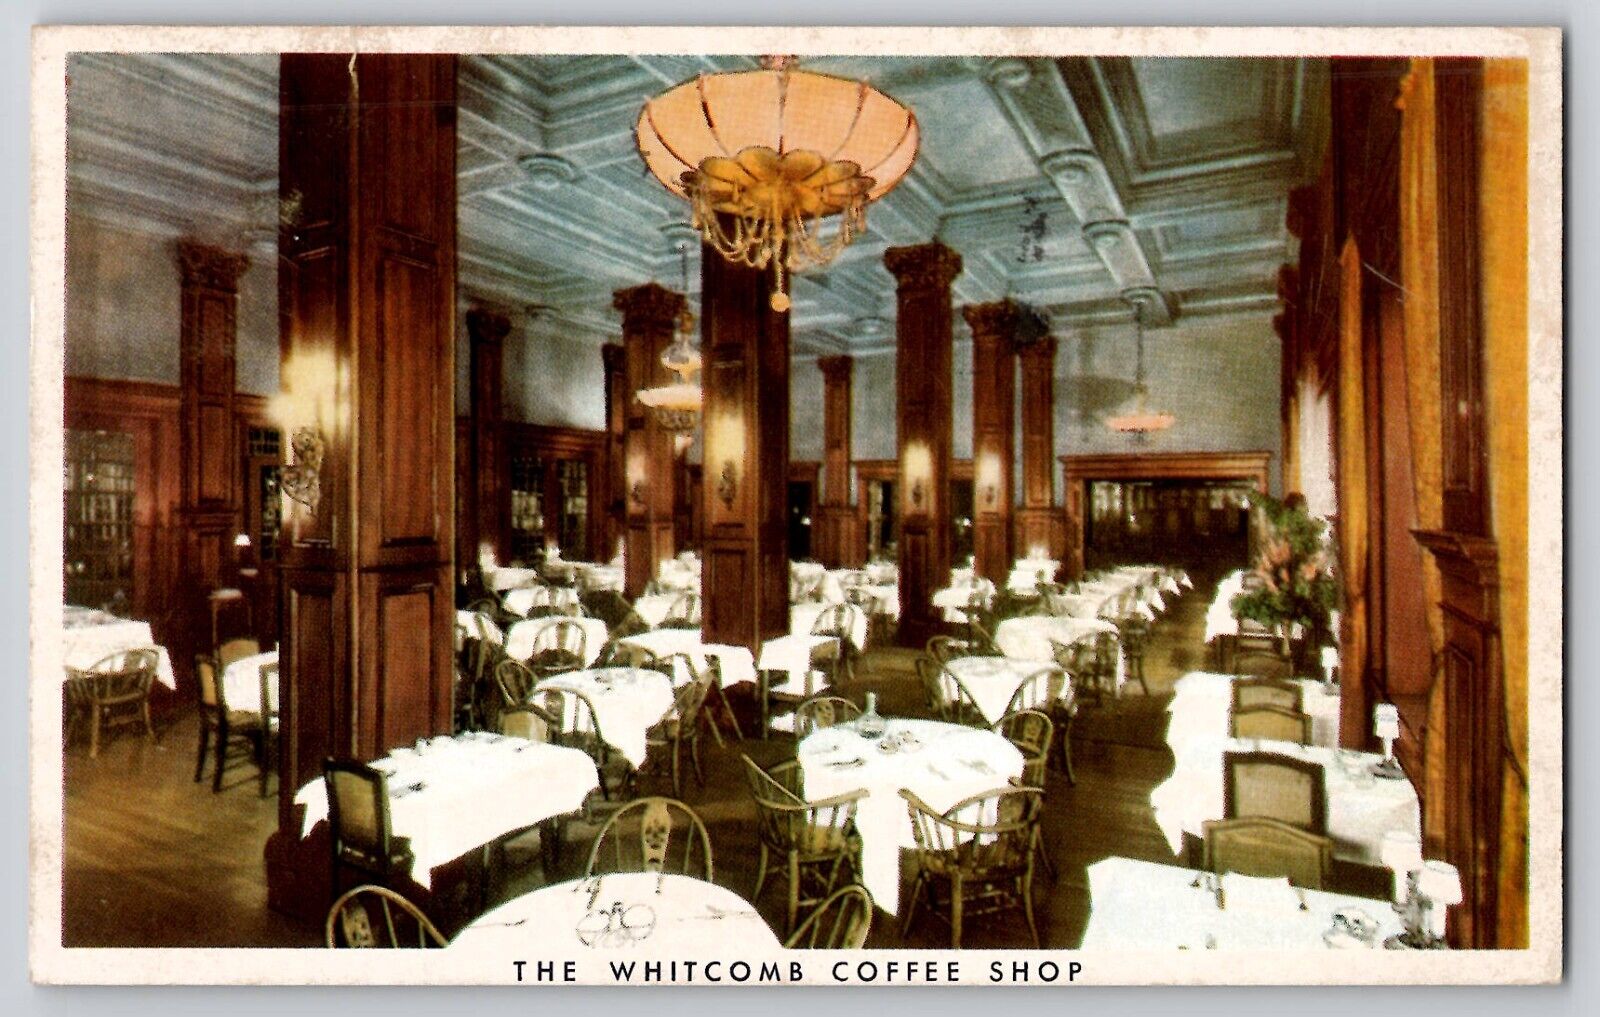 Hotel Whitcomb Coffee Shop WB Postcard 1940 Golden Gate Exposition Postmark